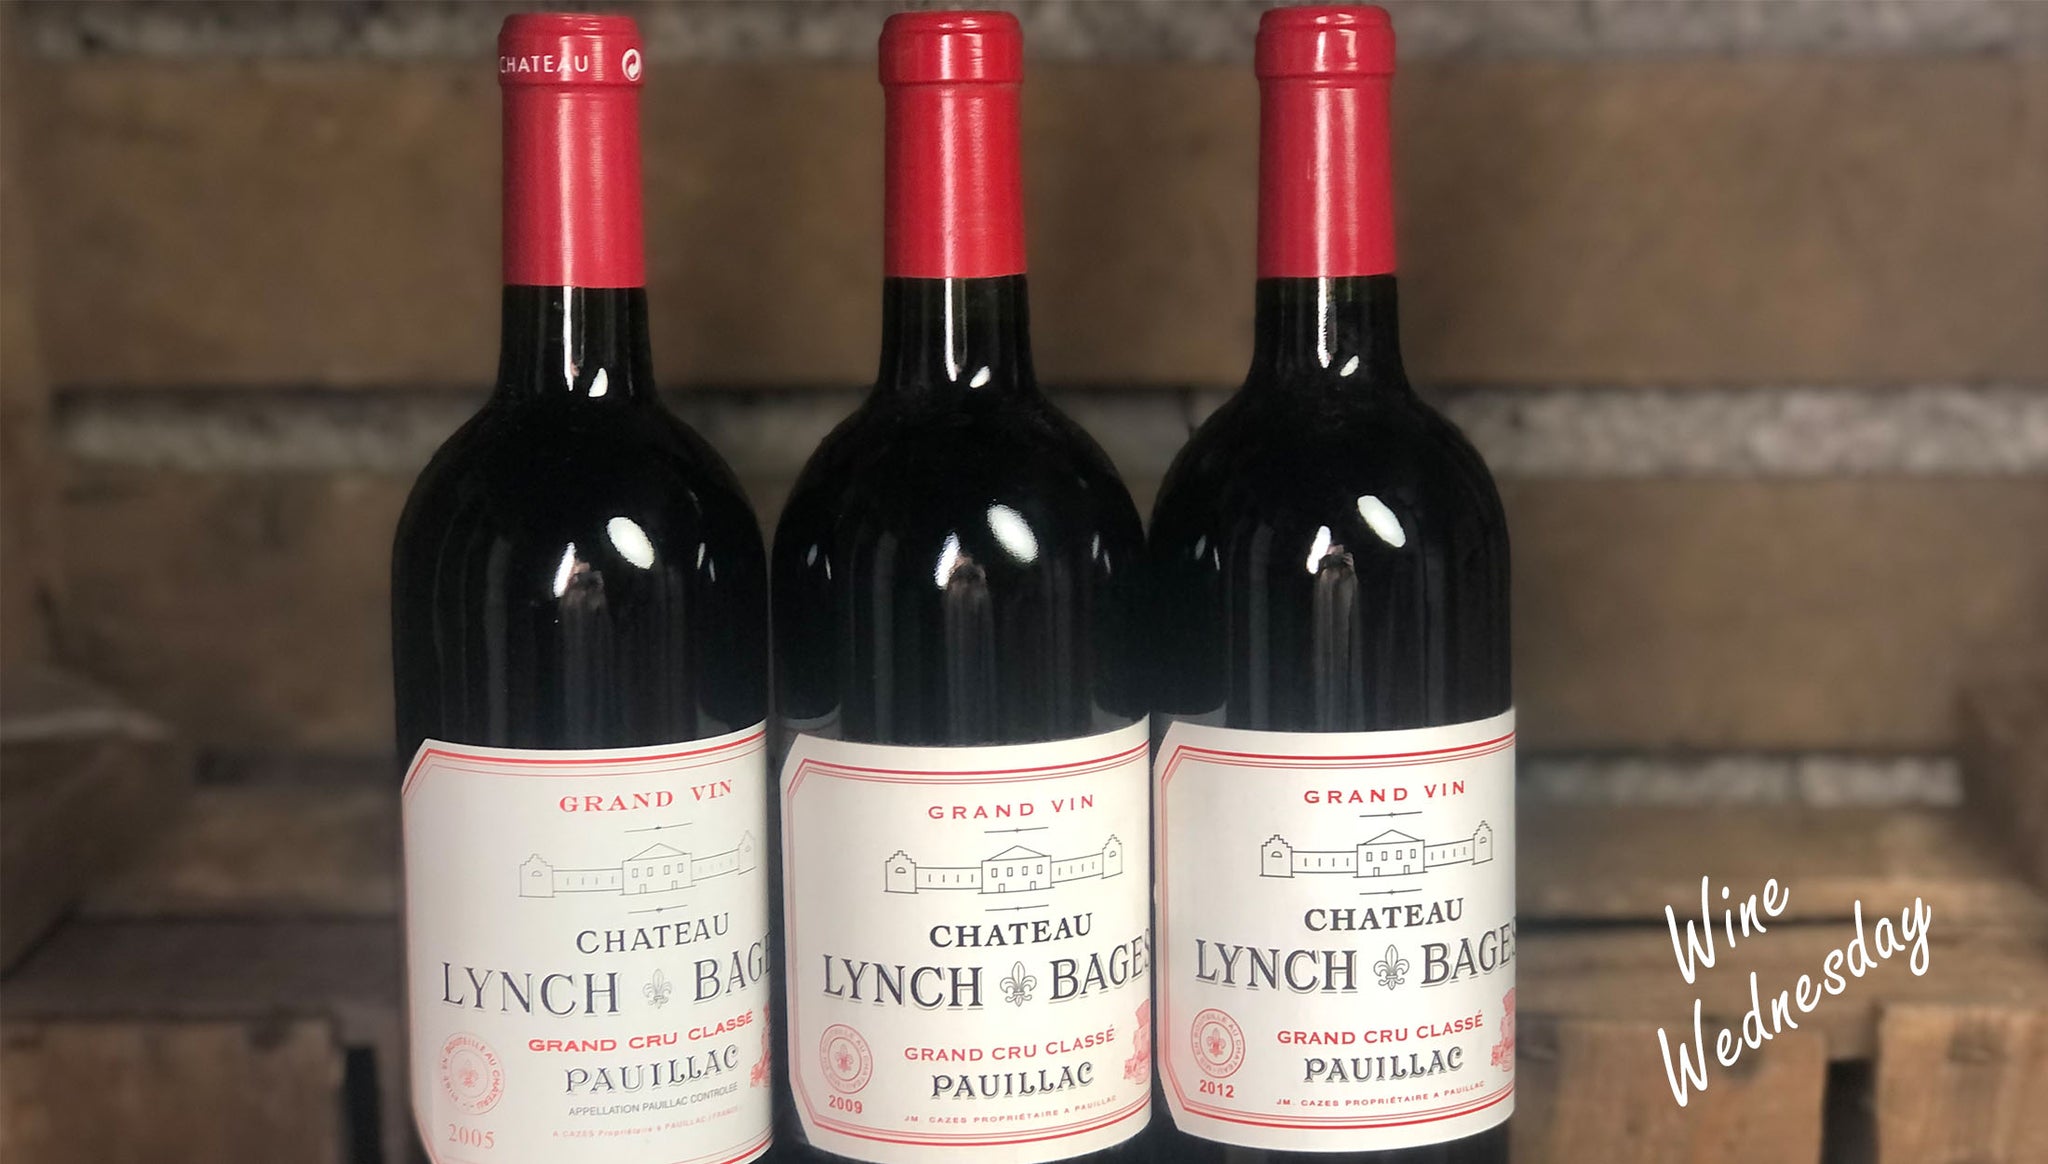 #WineWednesday is all about Chateau Lynch Bages